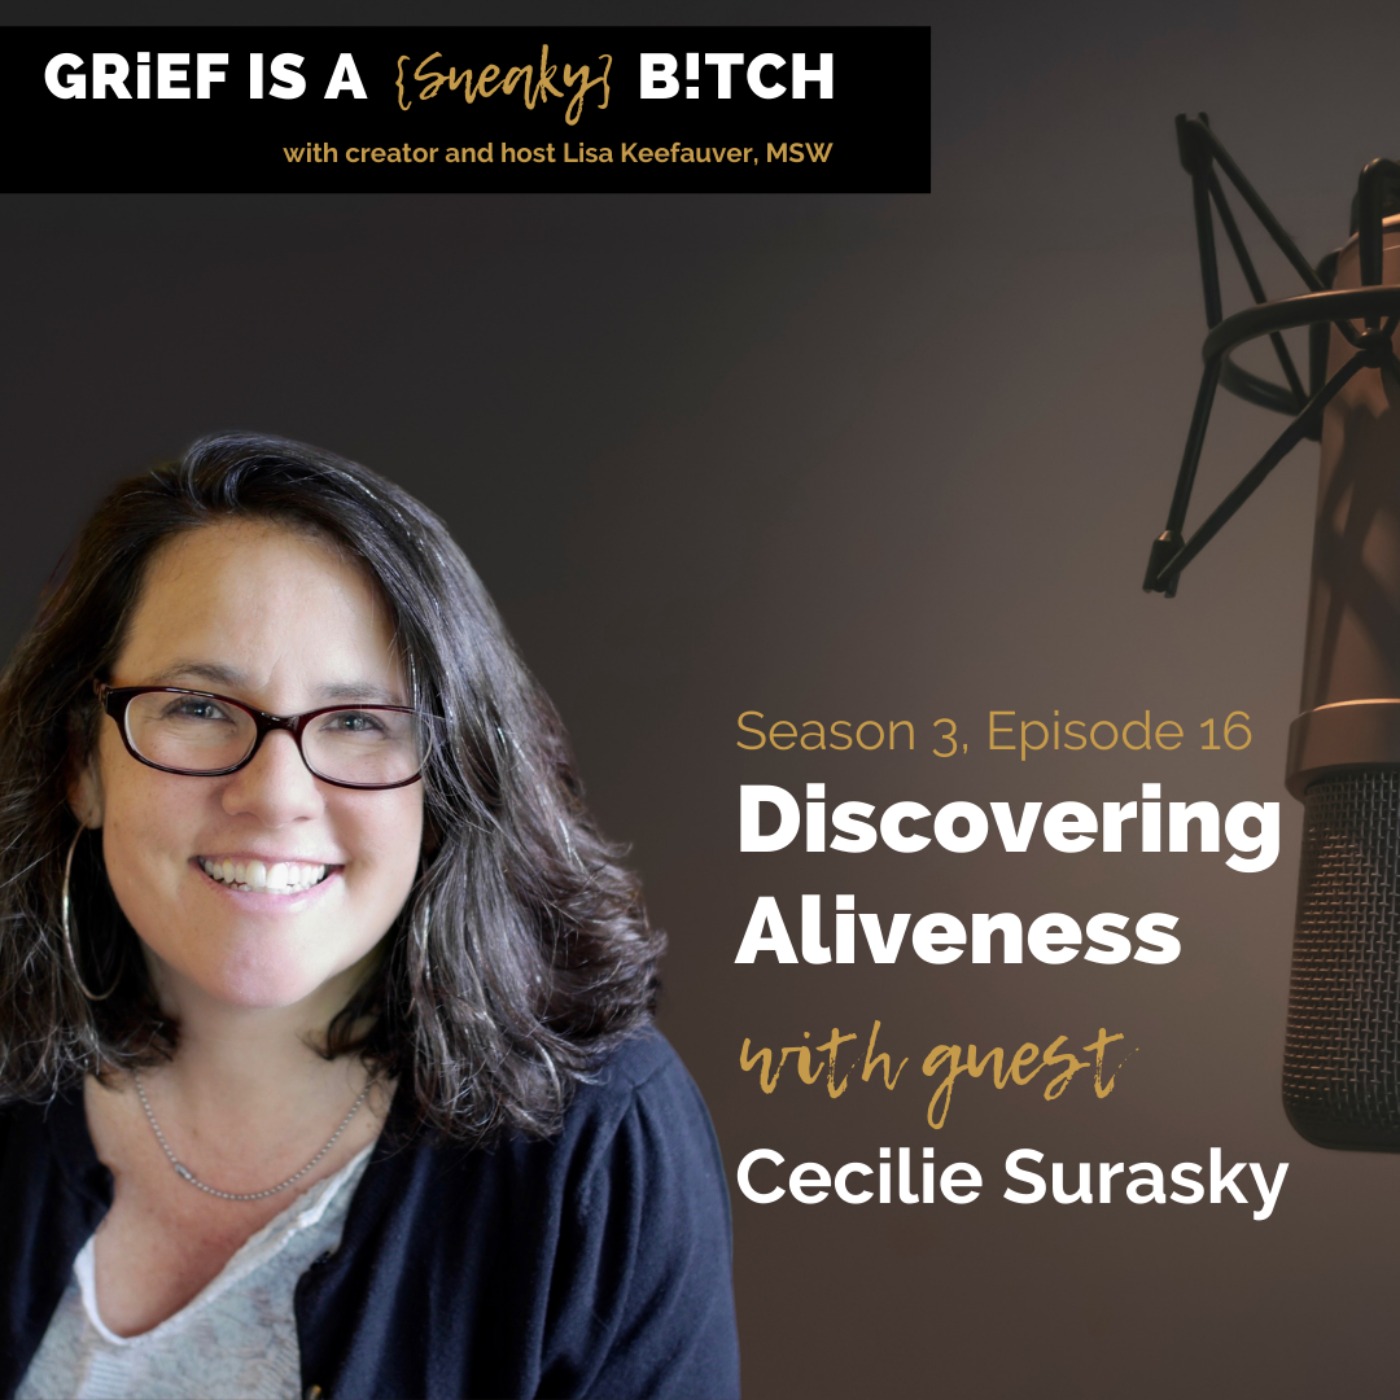 Cecilie Surasky|Discovering Aliveness